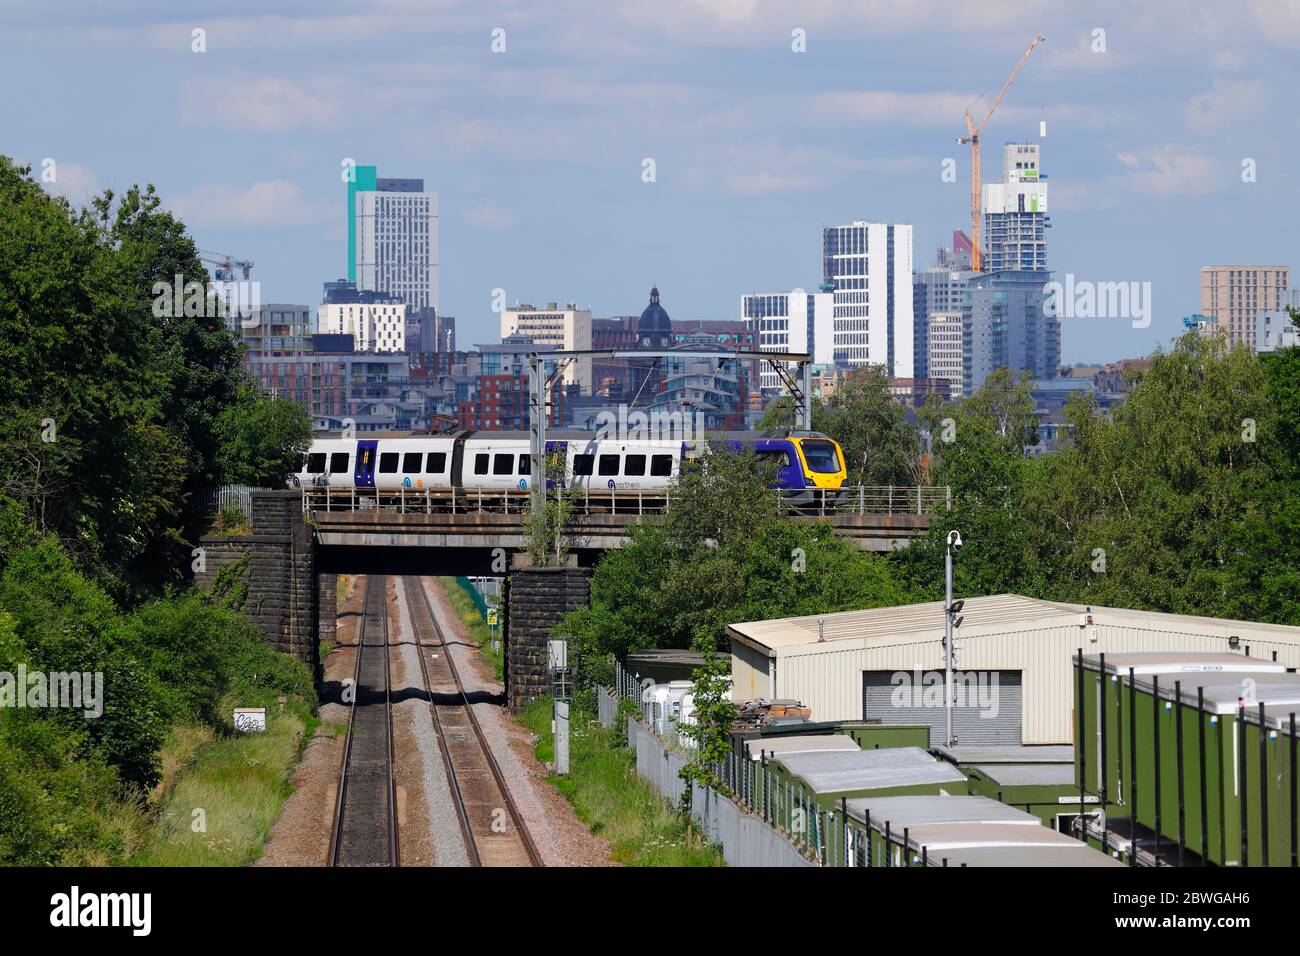 A rail class 331 train operated by Northern Rail, passes in front of Leeds Skyline Stock Photo